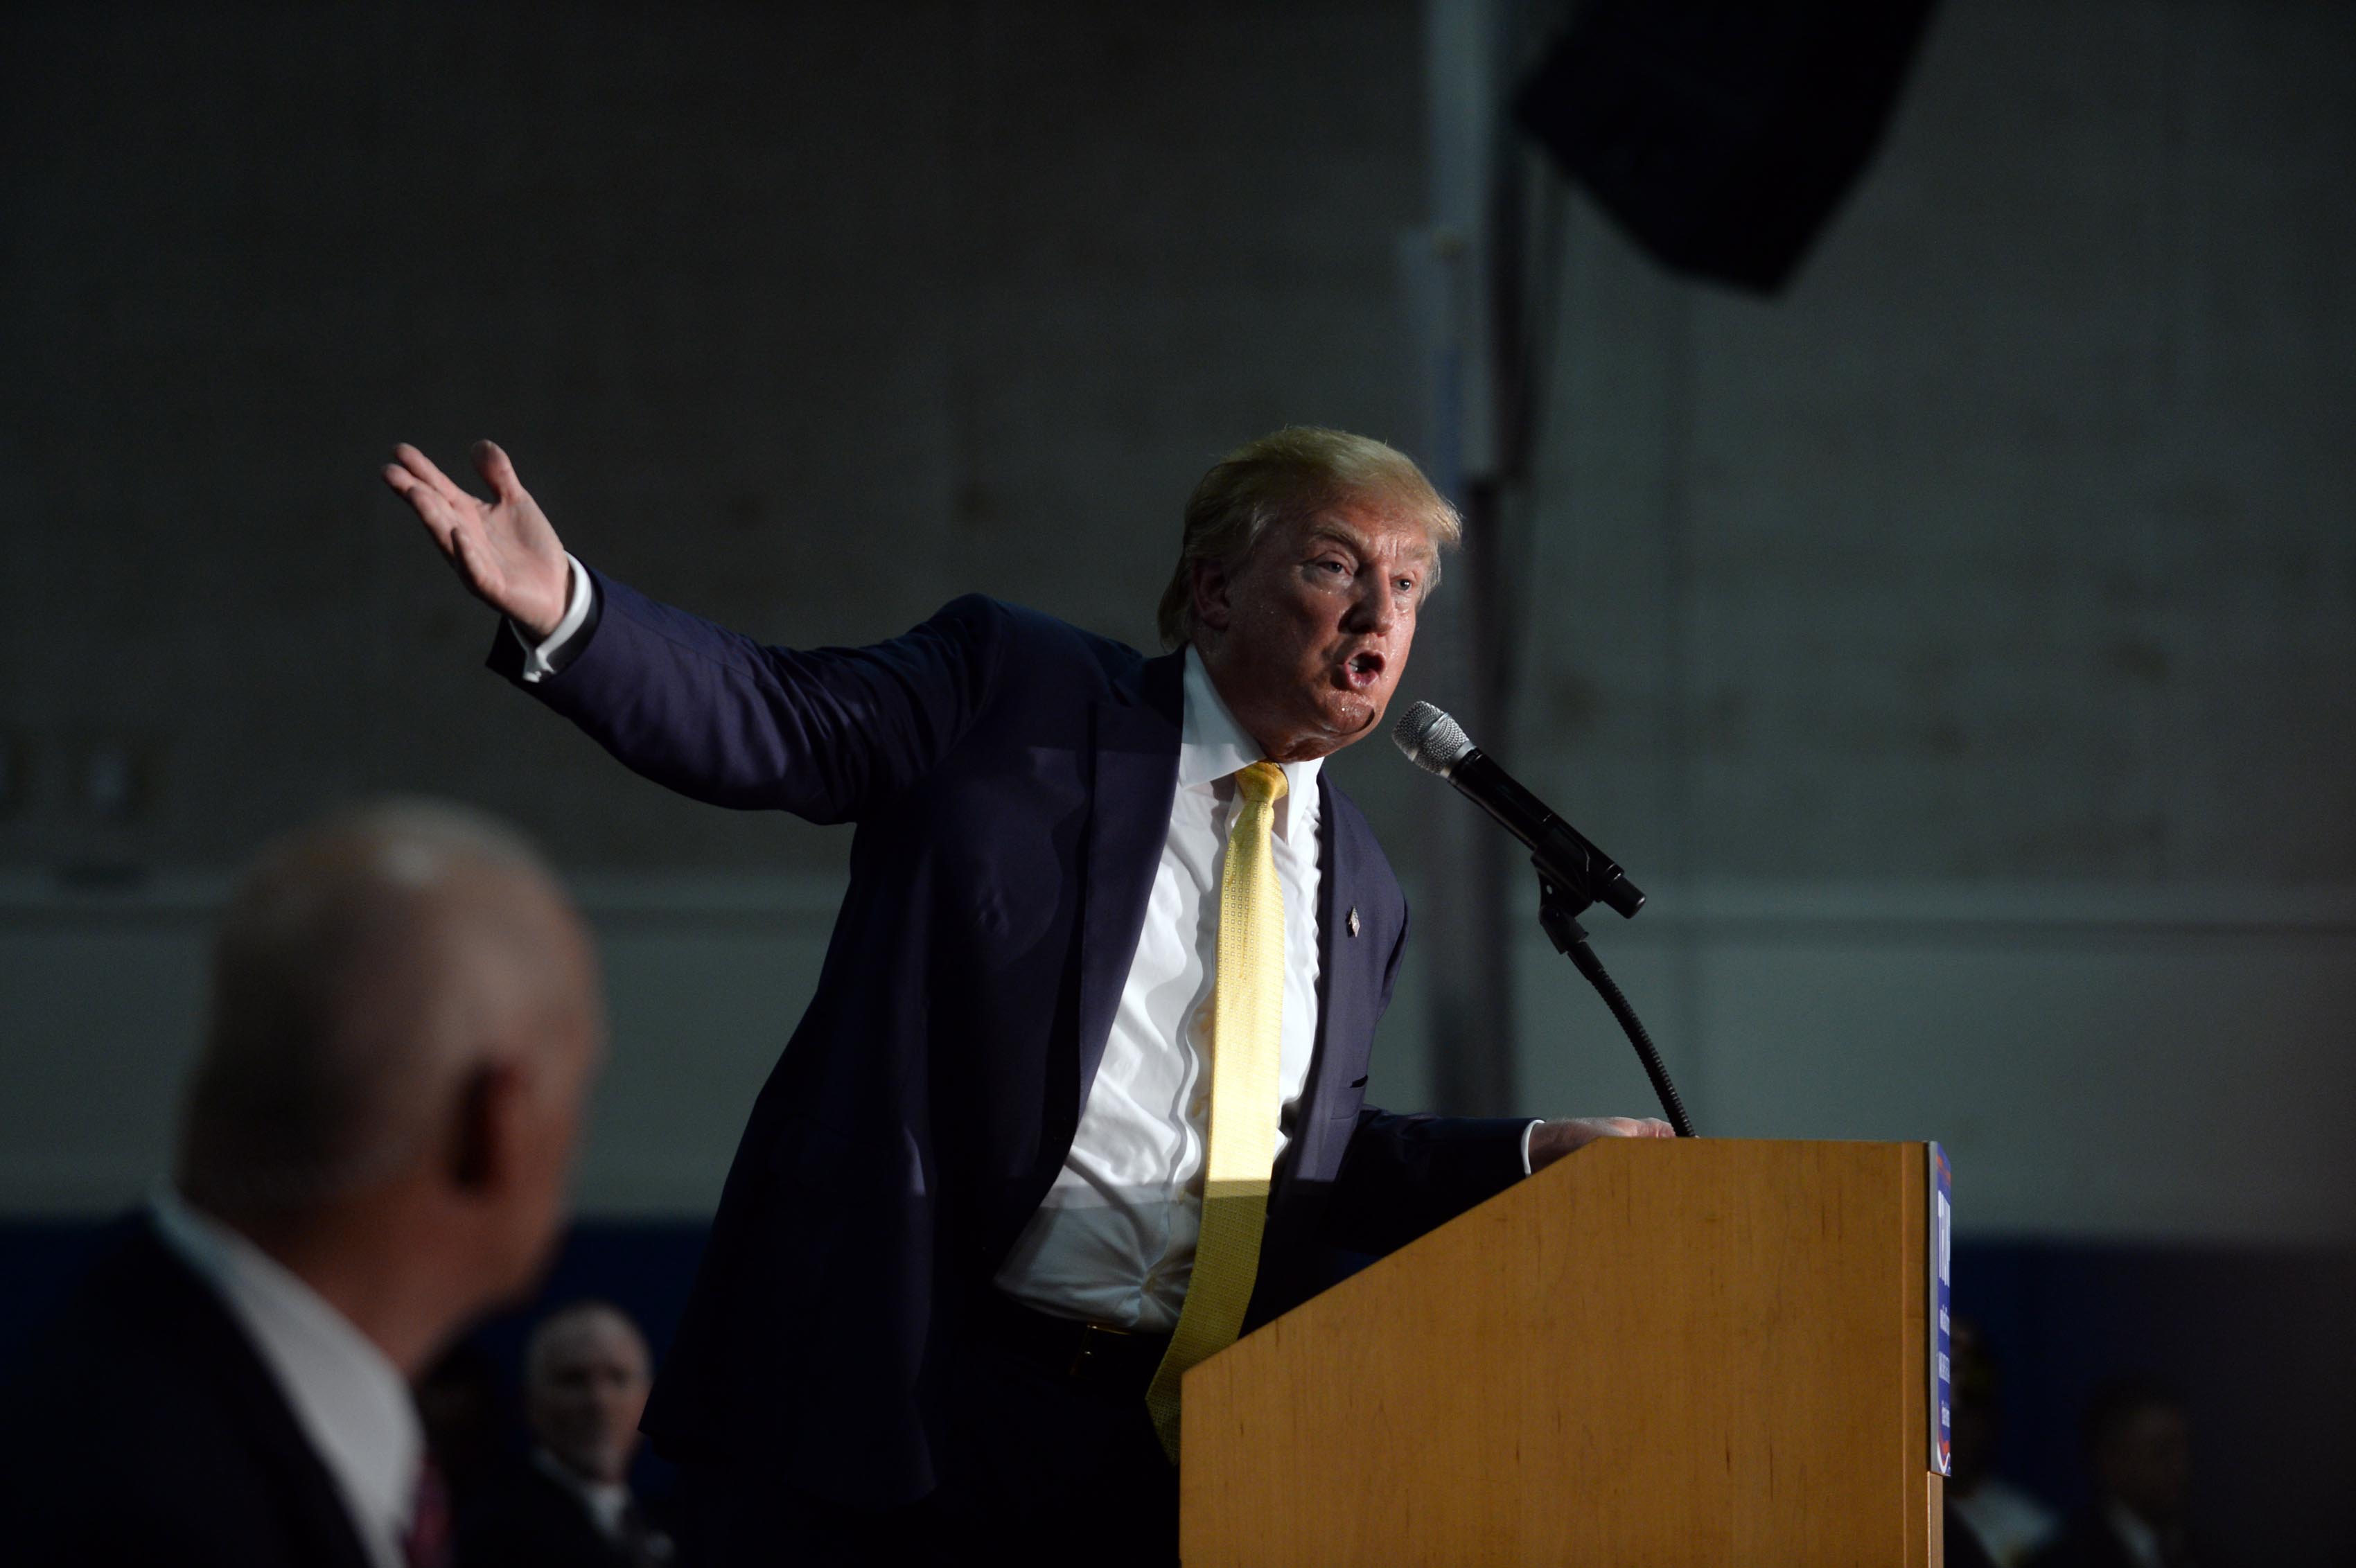 Republican Presidential candidate Donald Trump speaks during a town hall event at Rochester Recreational Arena in Rochester, NH on Sept. 17, 2015. (Darren McCollester—Getty Images)